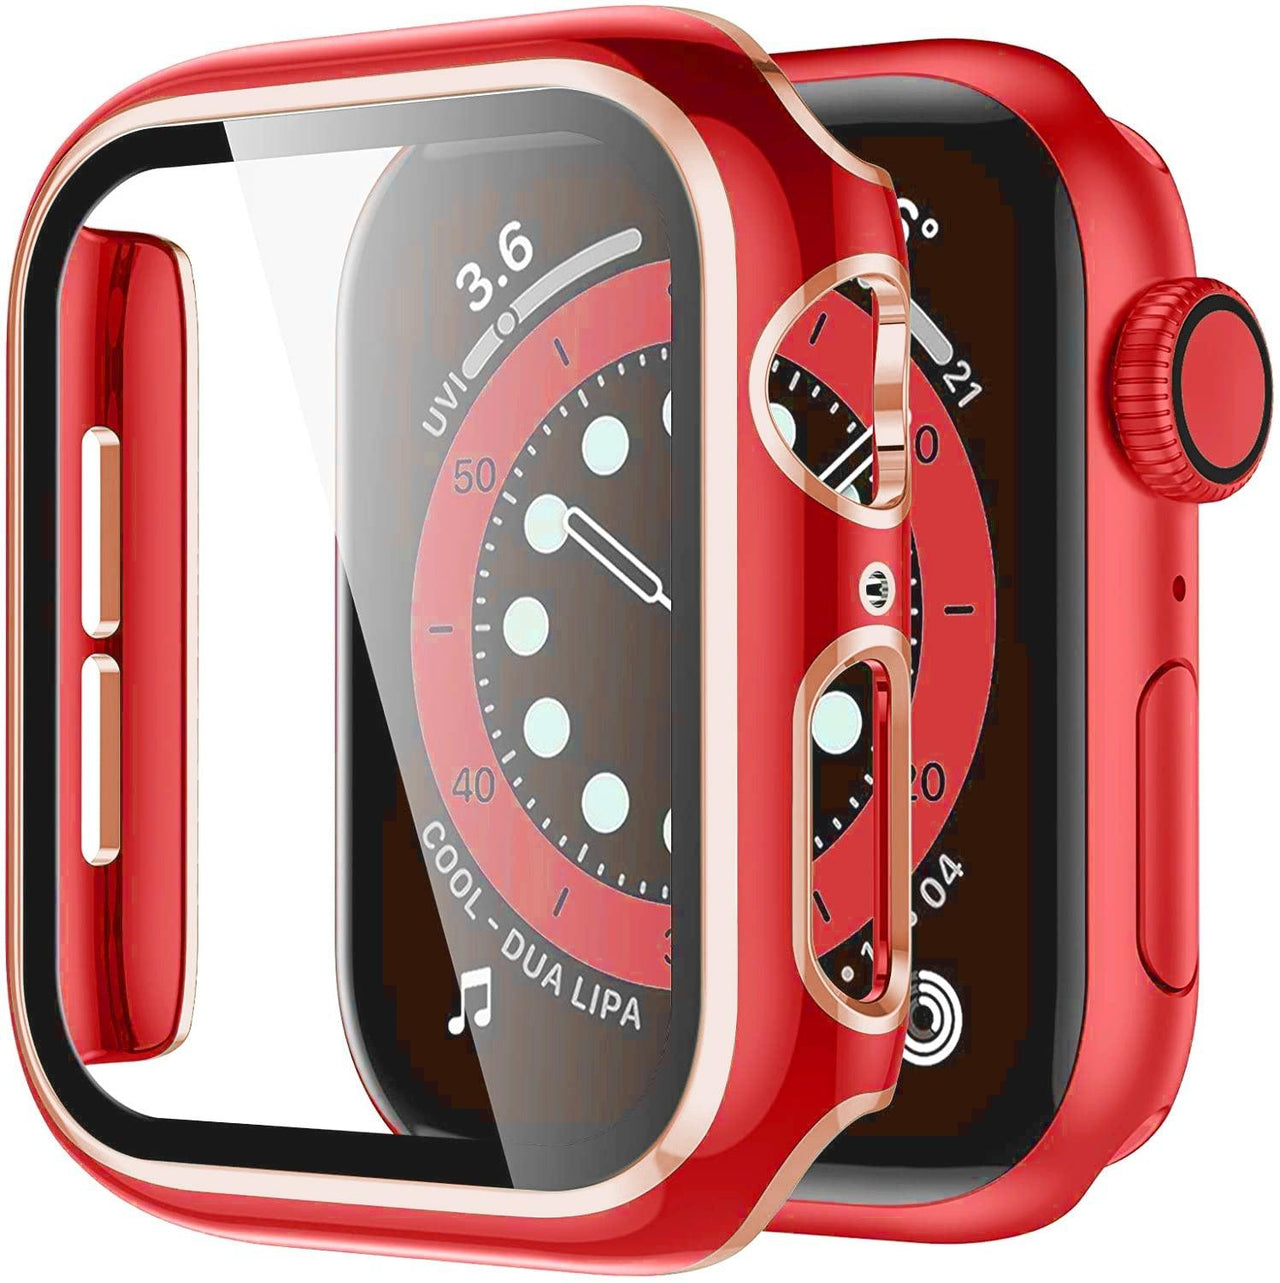 Shockproof Case and Glass Protector for Apple Watch - watchband.direct